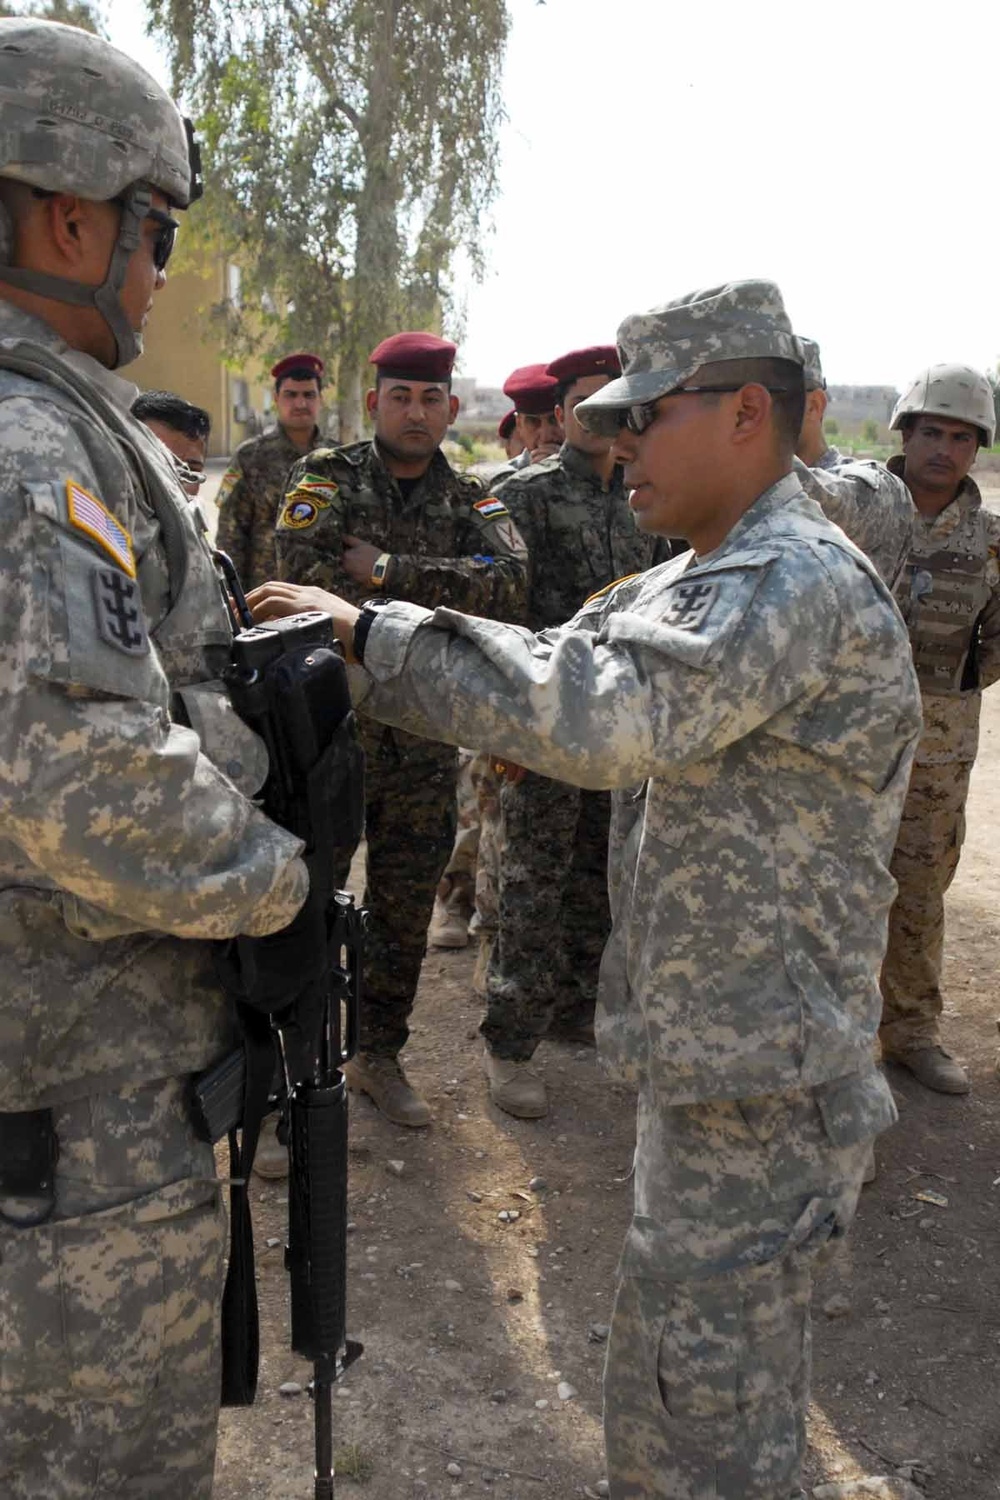 84th Engineers lay the blueprints for exceptional leadership among Iraqi army engineers